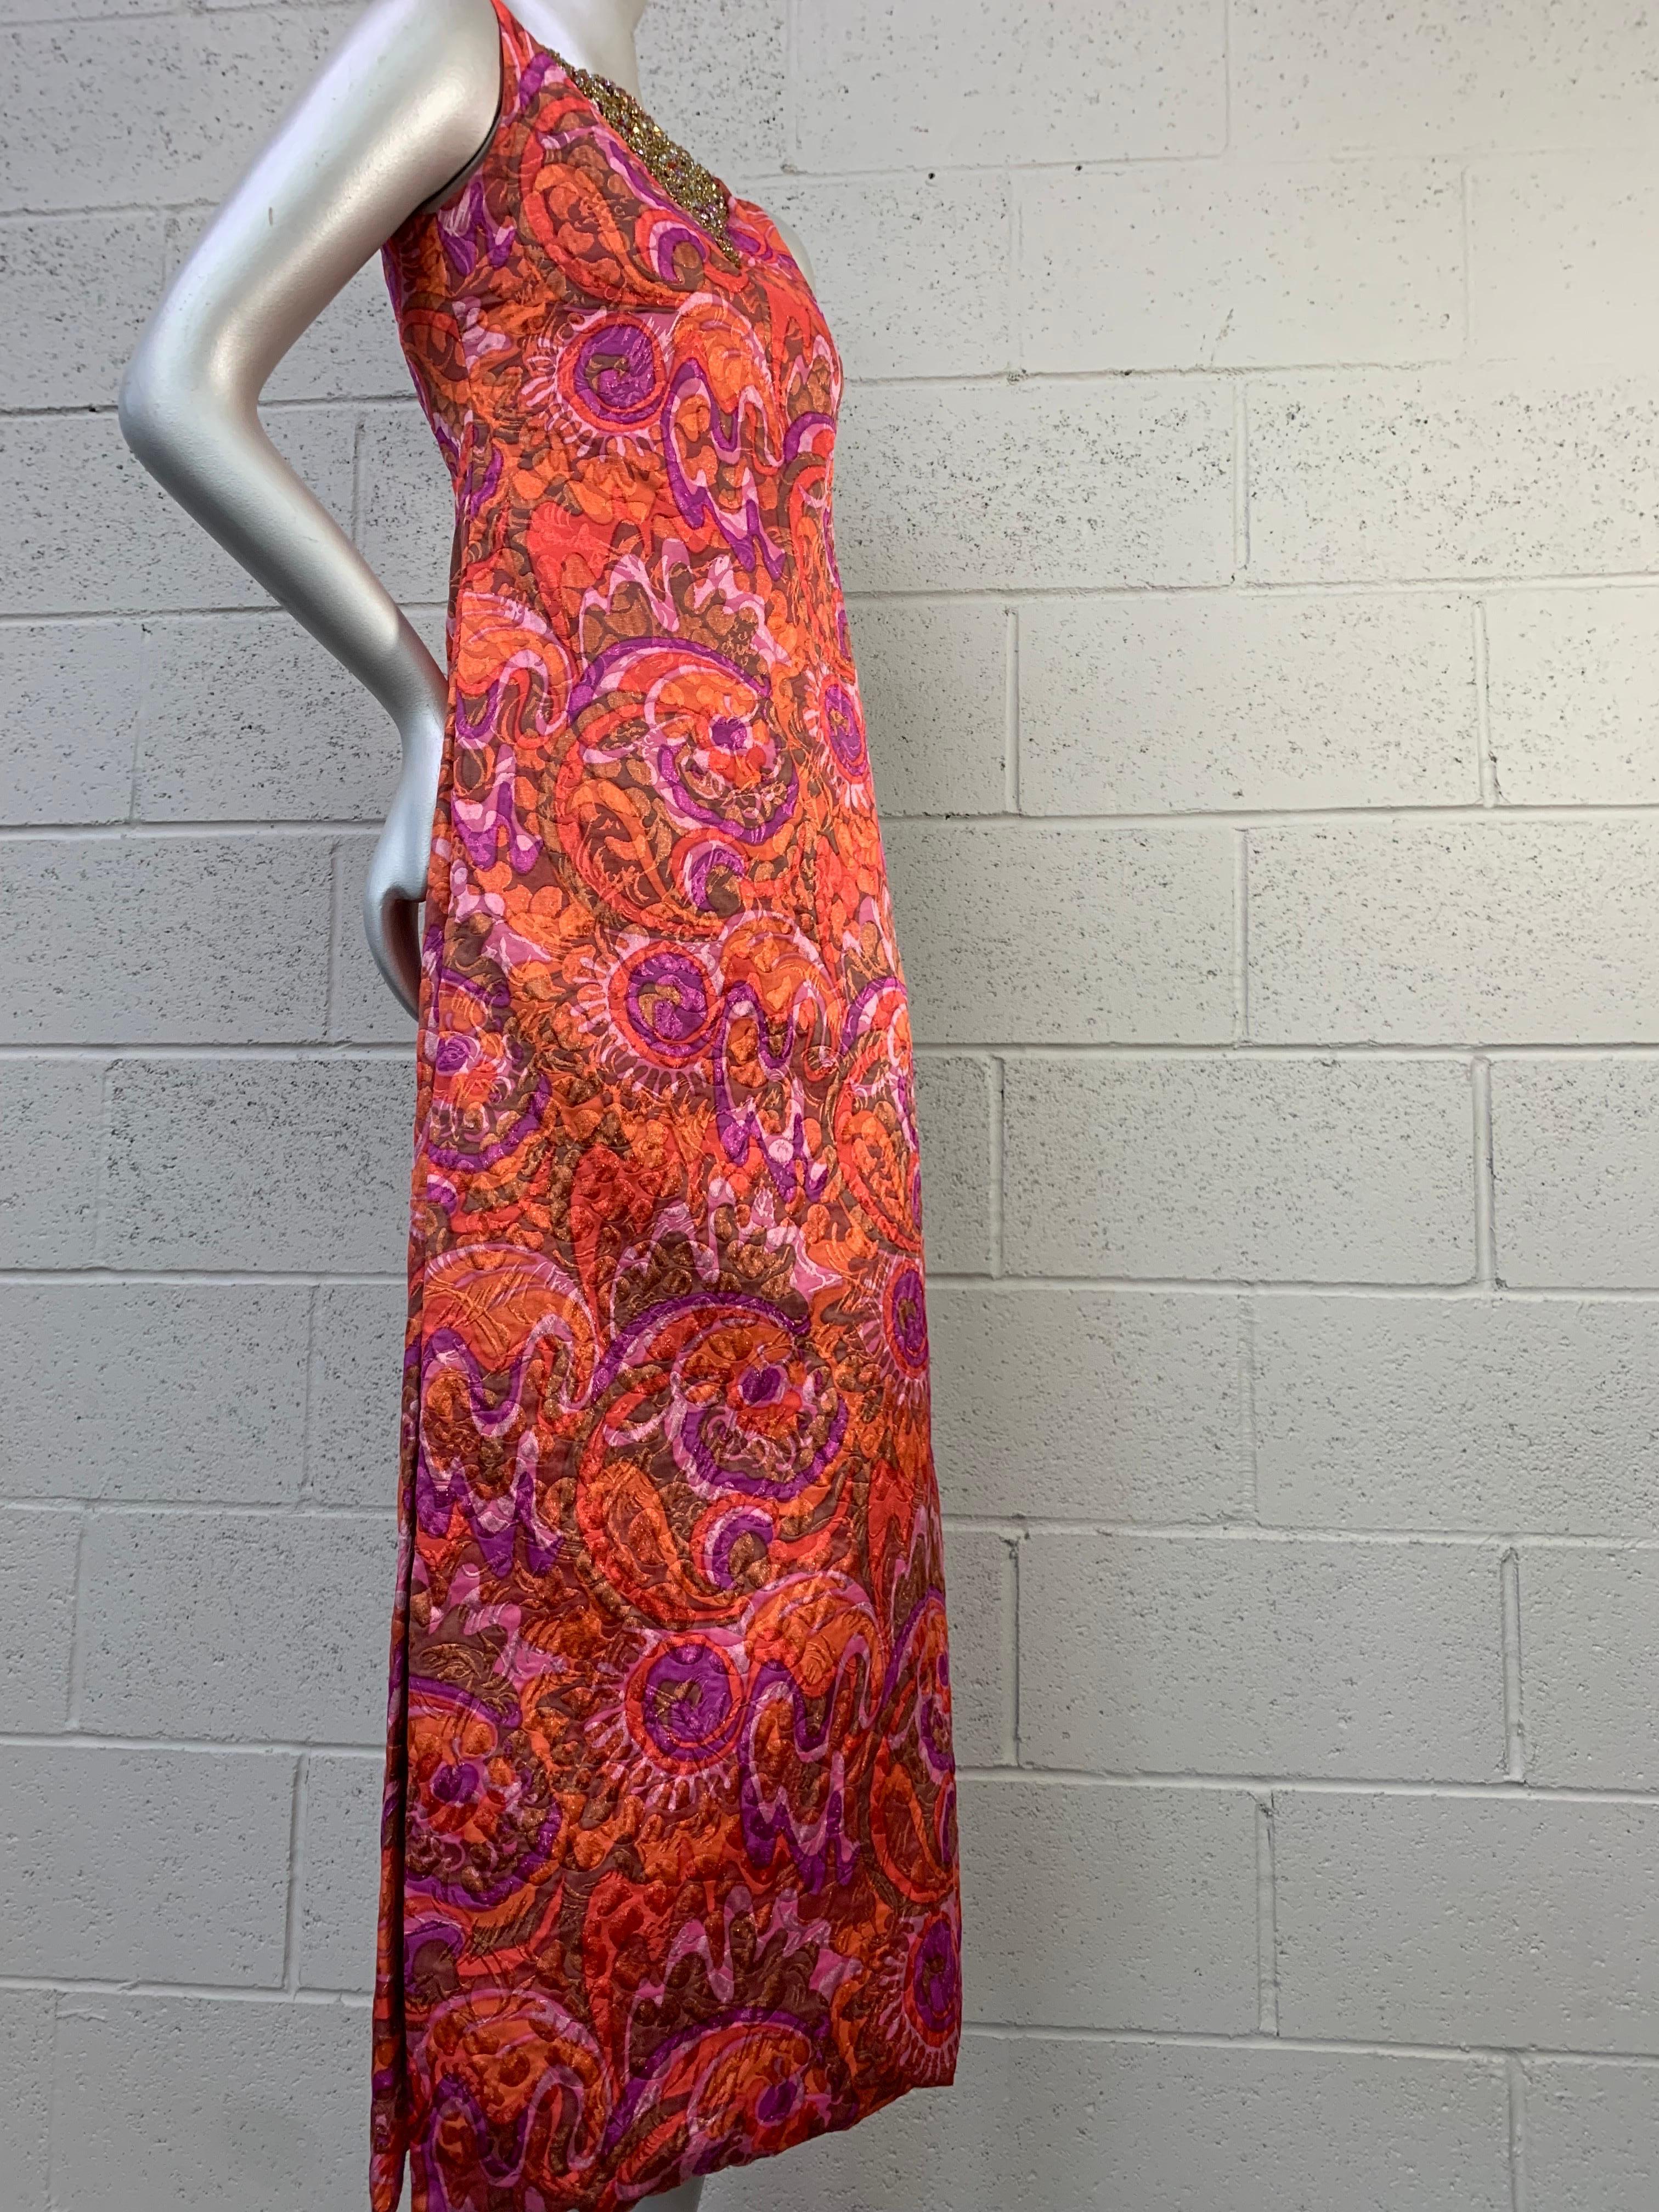 A beautiful 1960s Julius Garfinkle Mod silk lame brocade sleeveless column gown with side slit in a psychedelic print over floral/paisley pattern of orange, purple and lavender palette. Neckline features a heavily beaded and rhinestoned Mughal-style